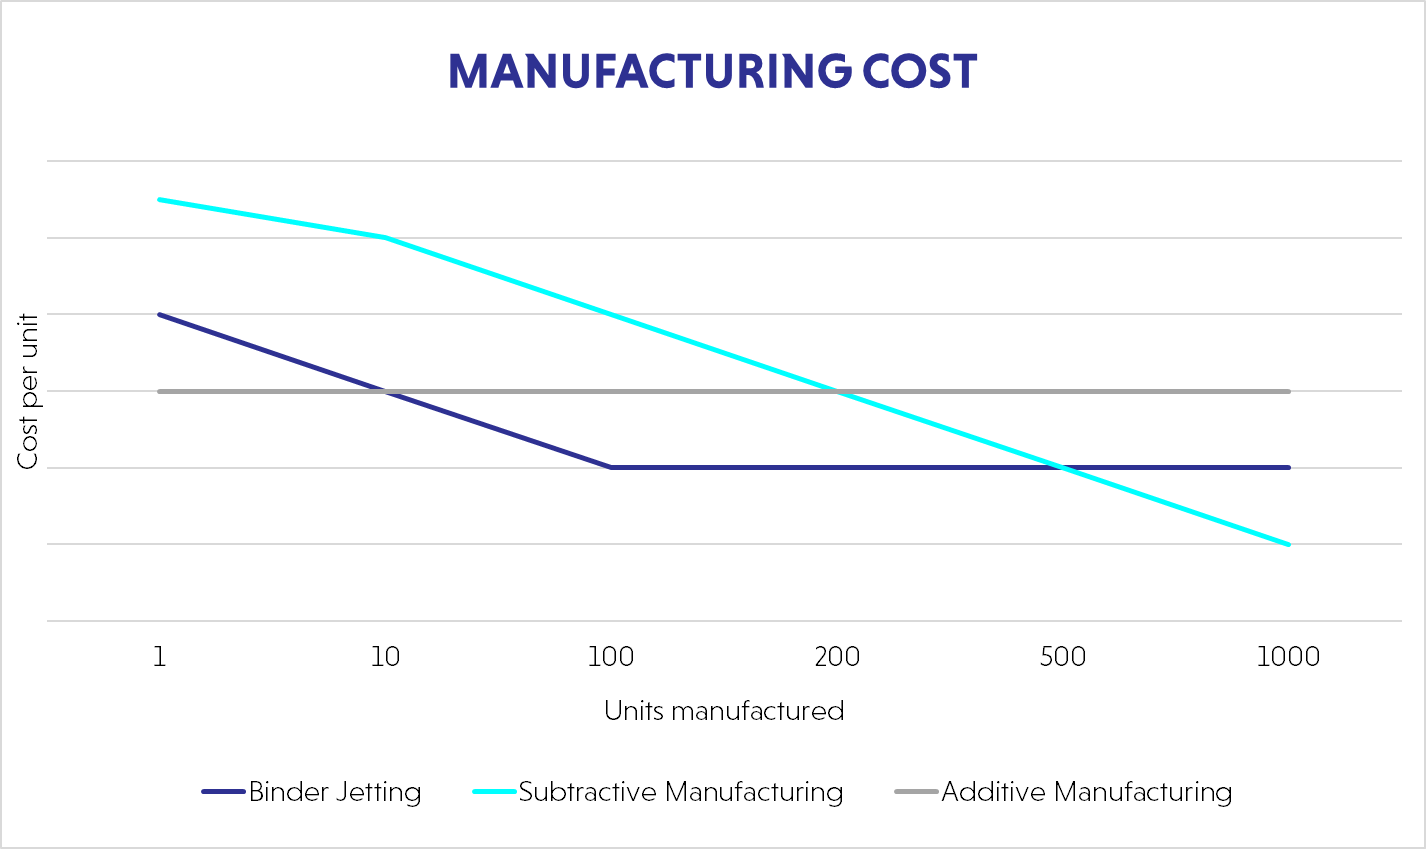 Manufacturing cost